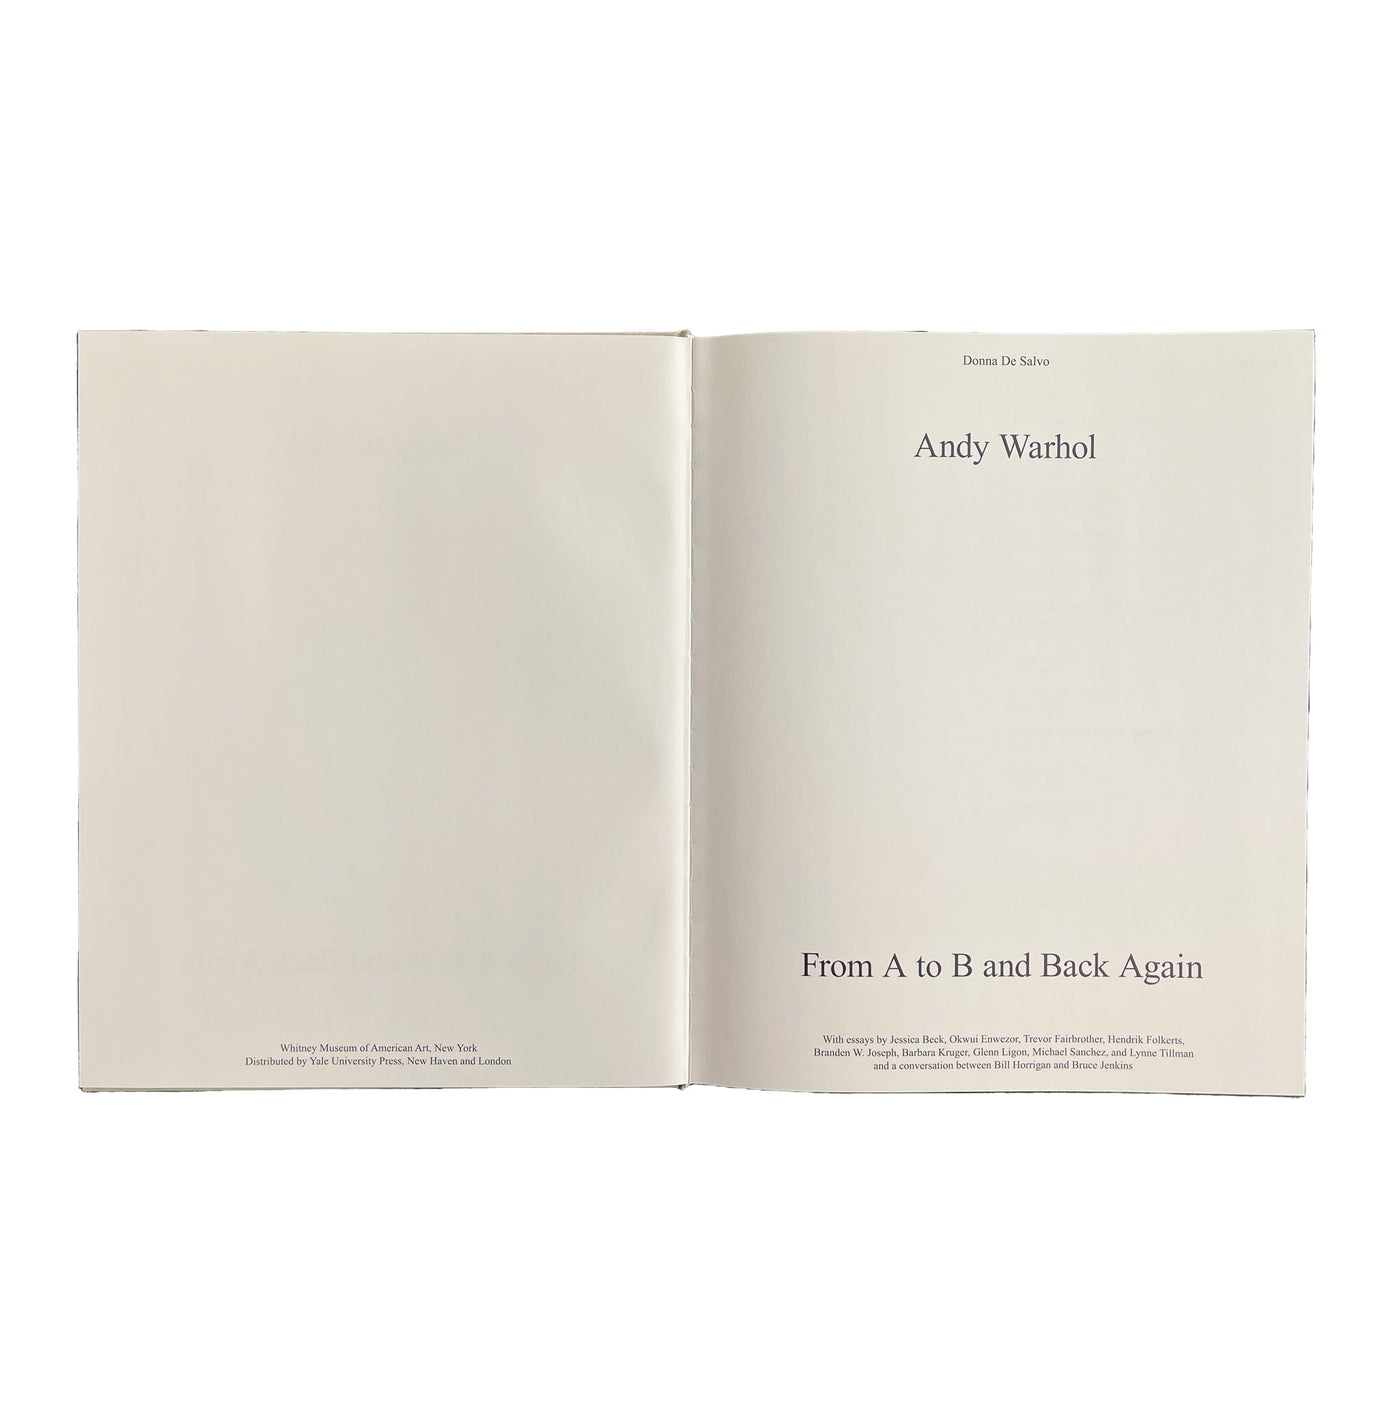 Andy Warhol: From A to B and Back Again - Gilded Coffee Table Book Books the bms 